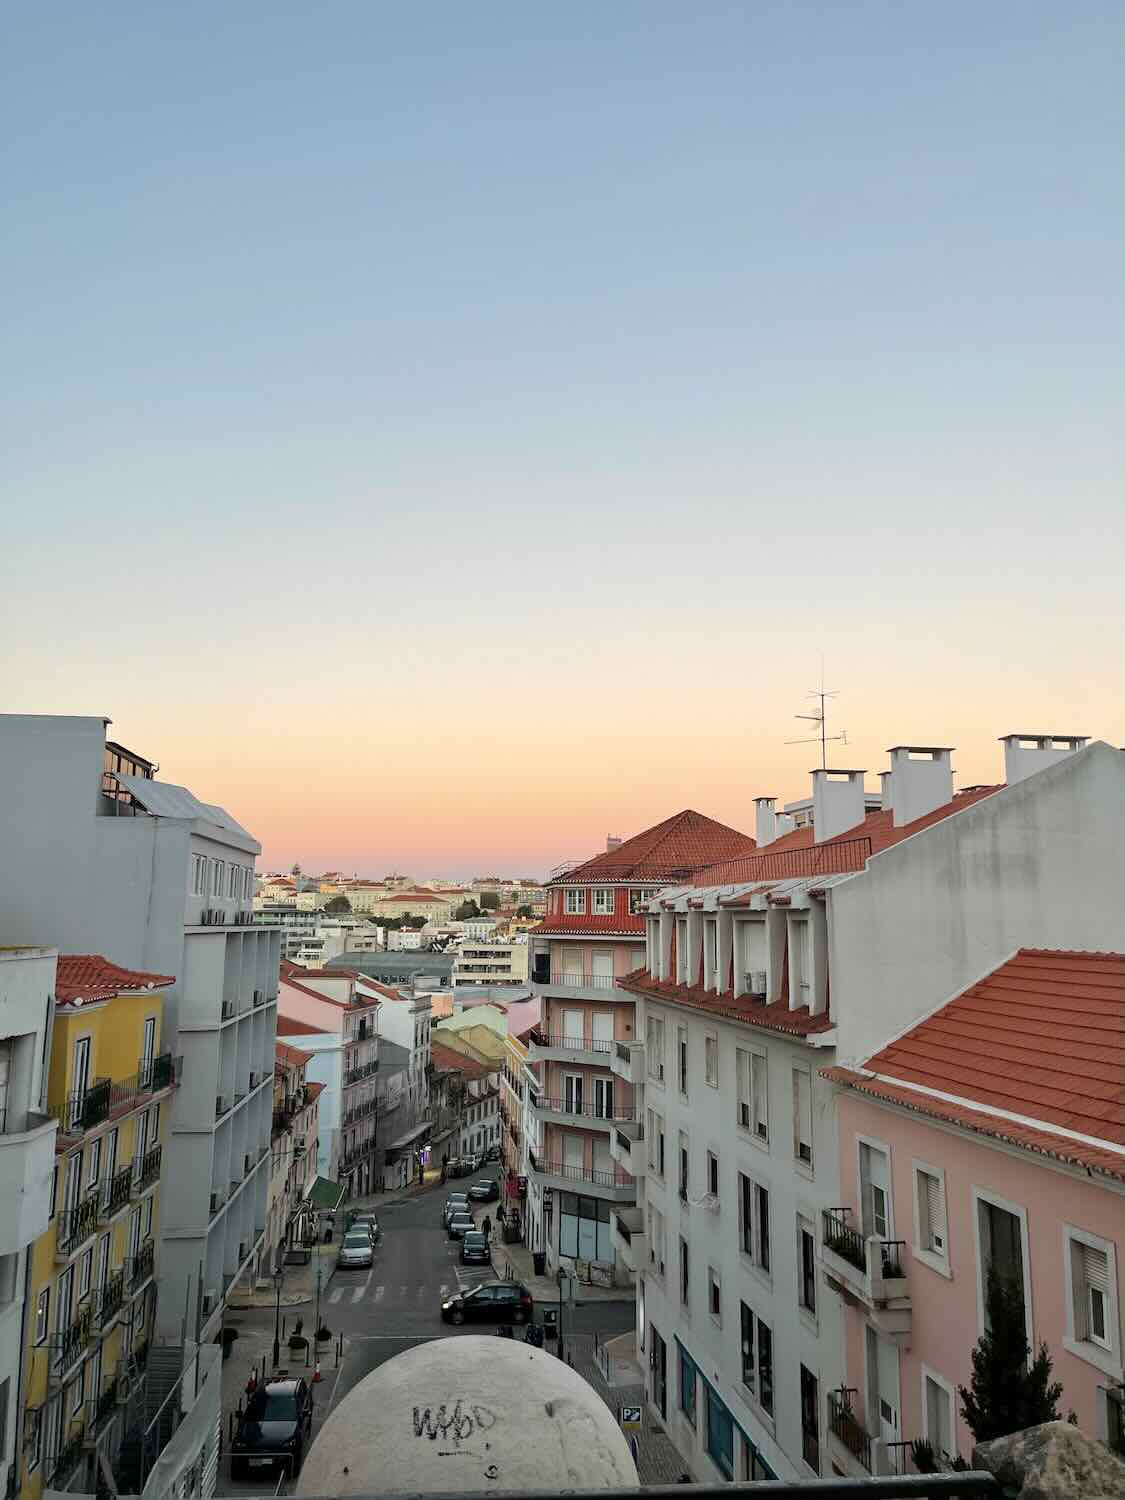 The streets of Lisbon bathed in the warm glow of sunset, highlighting the city's residential buildings and calm urban atmosphere.